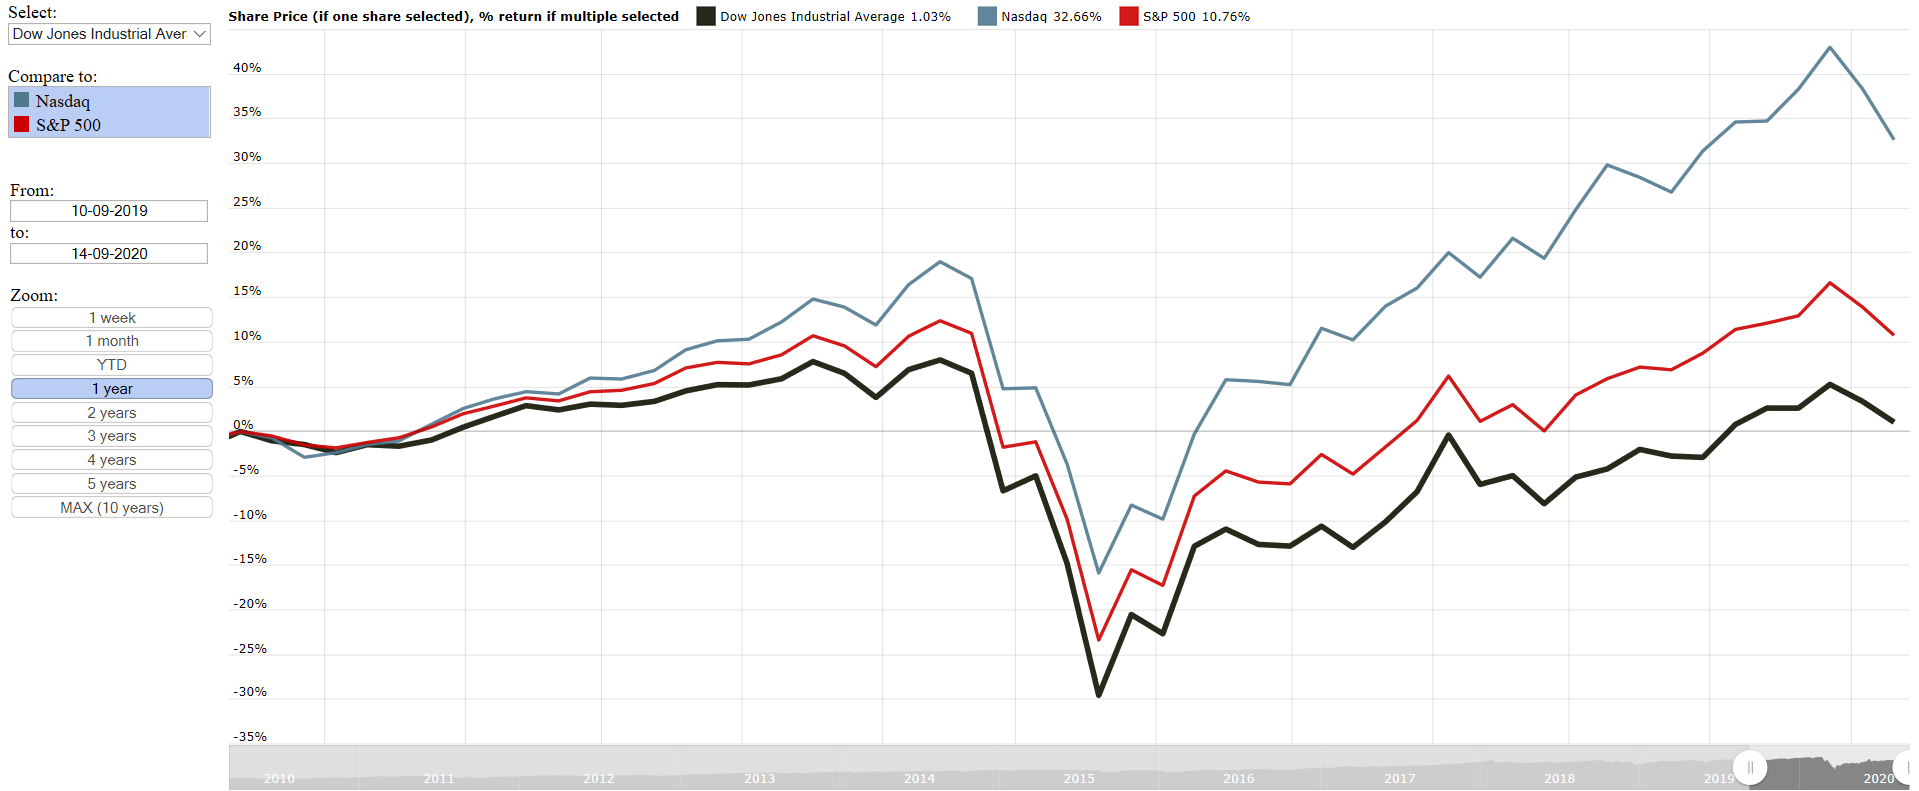 Dow, Nasdaq and S&P500 over the last year